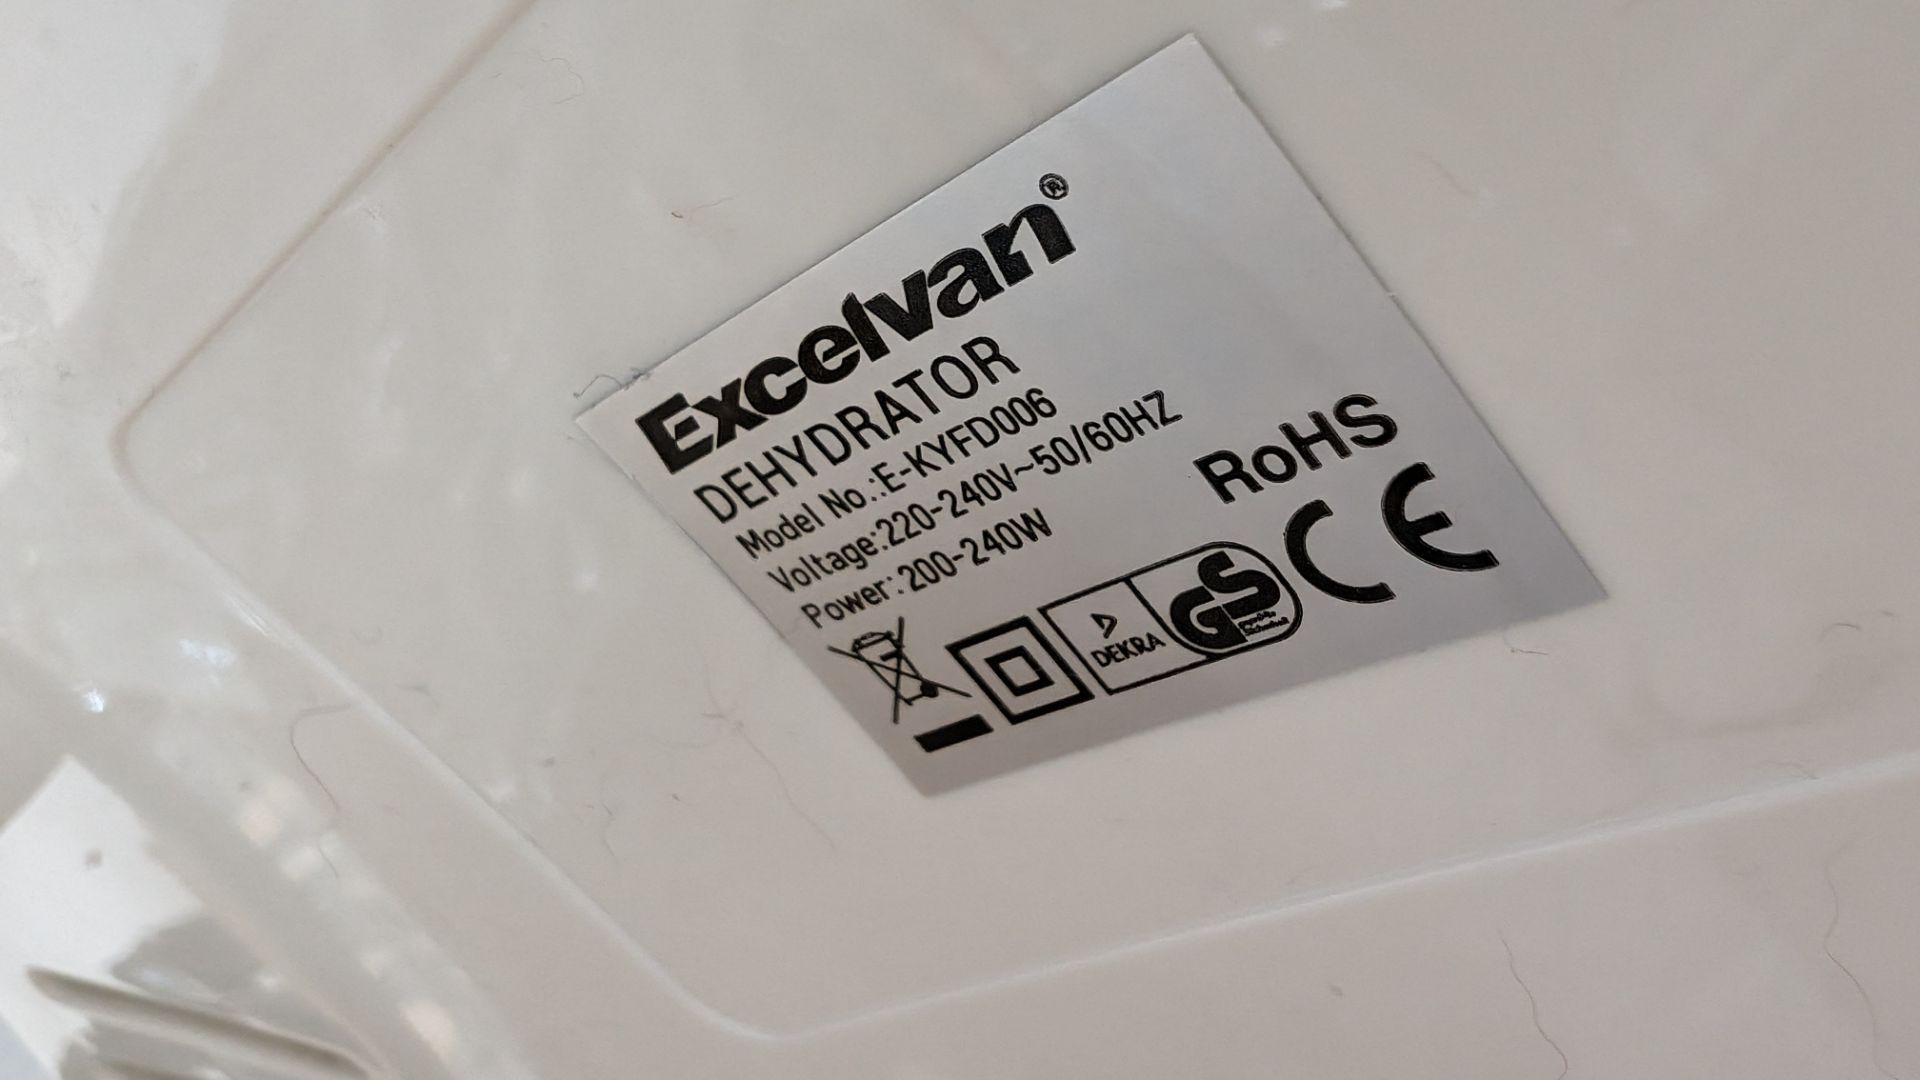 Excelvan dehydrating device - Image 6 of 6